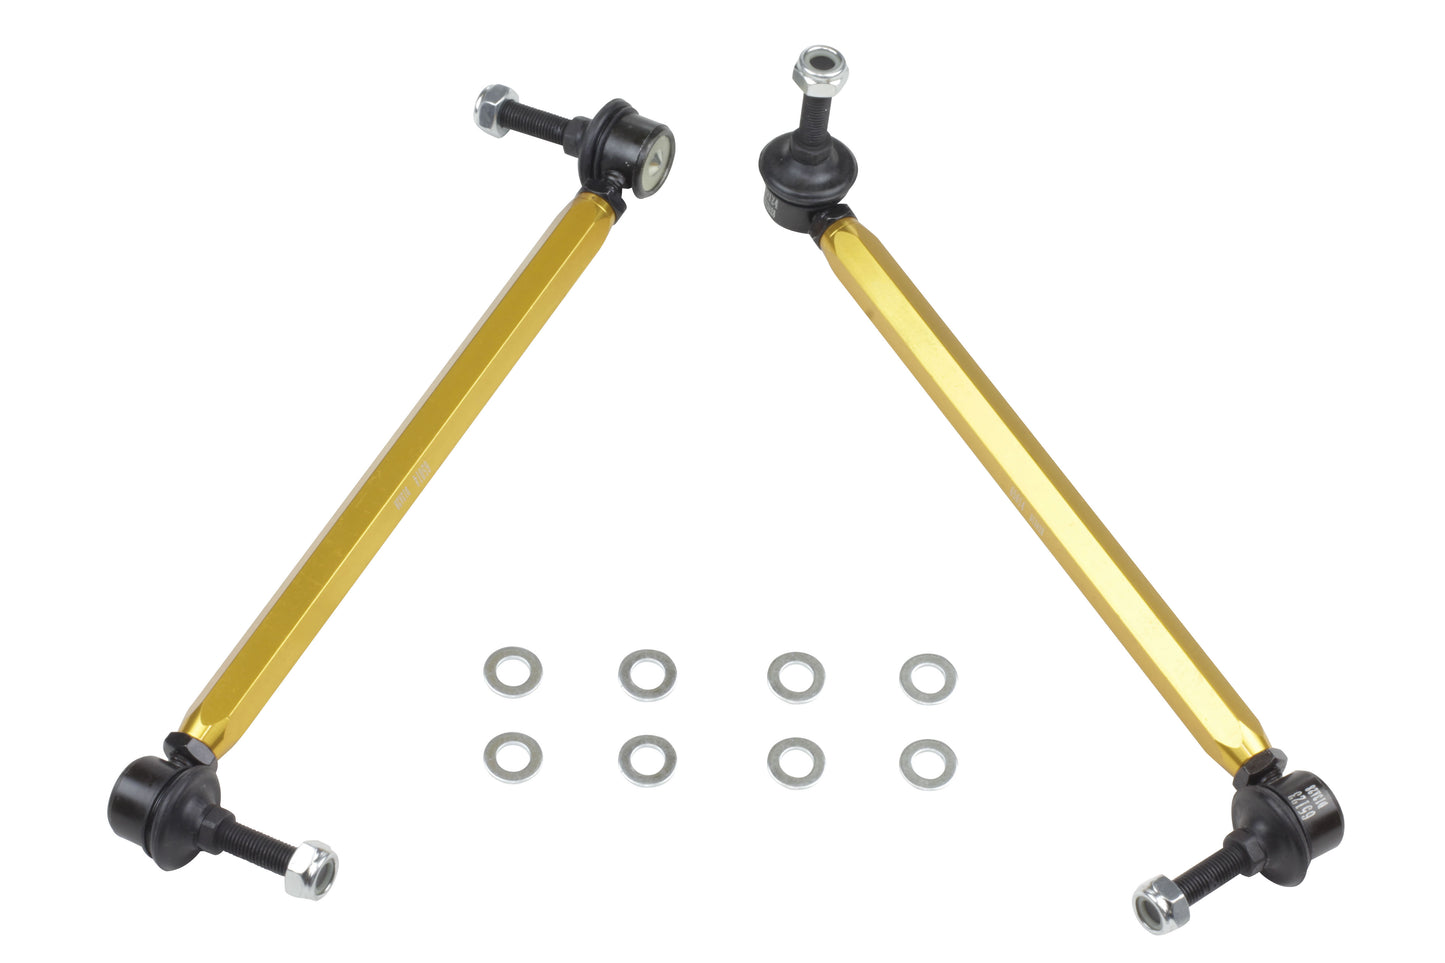 Whiteline Adjustable Front Anti Roll Bar Drop Links for BMW 1M E82 (11-12)